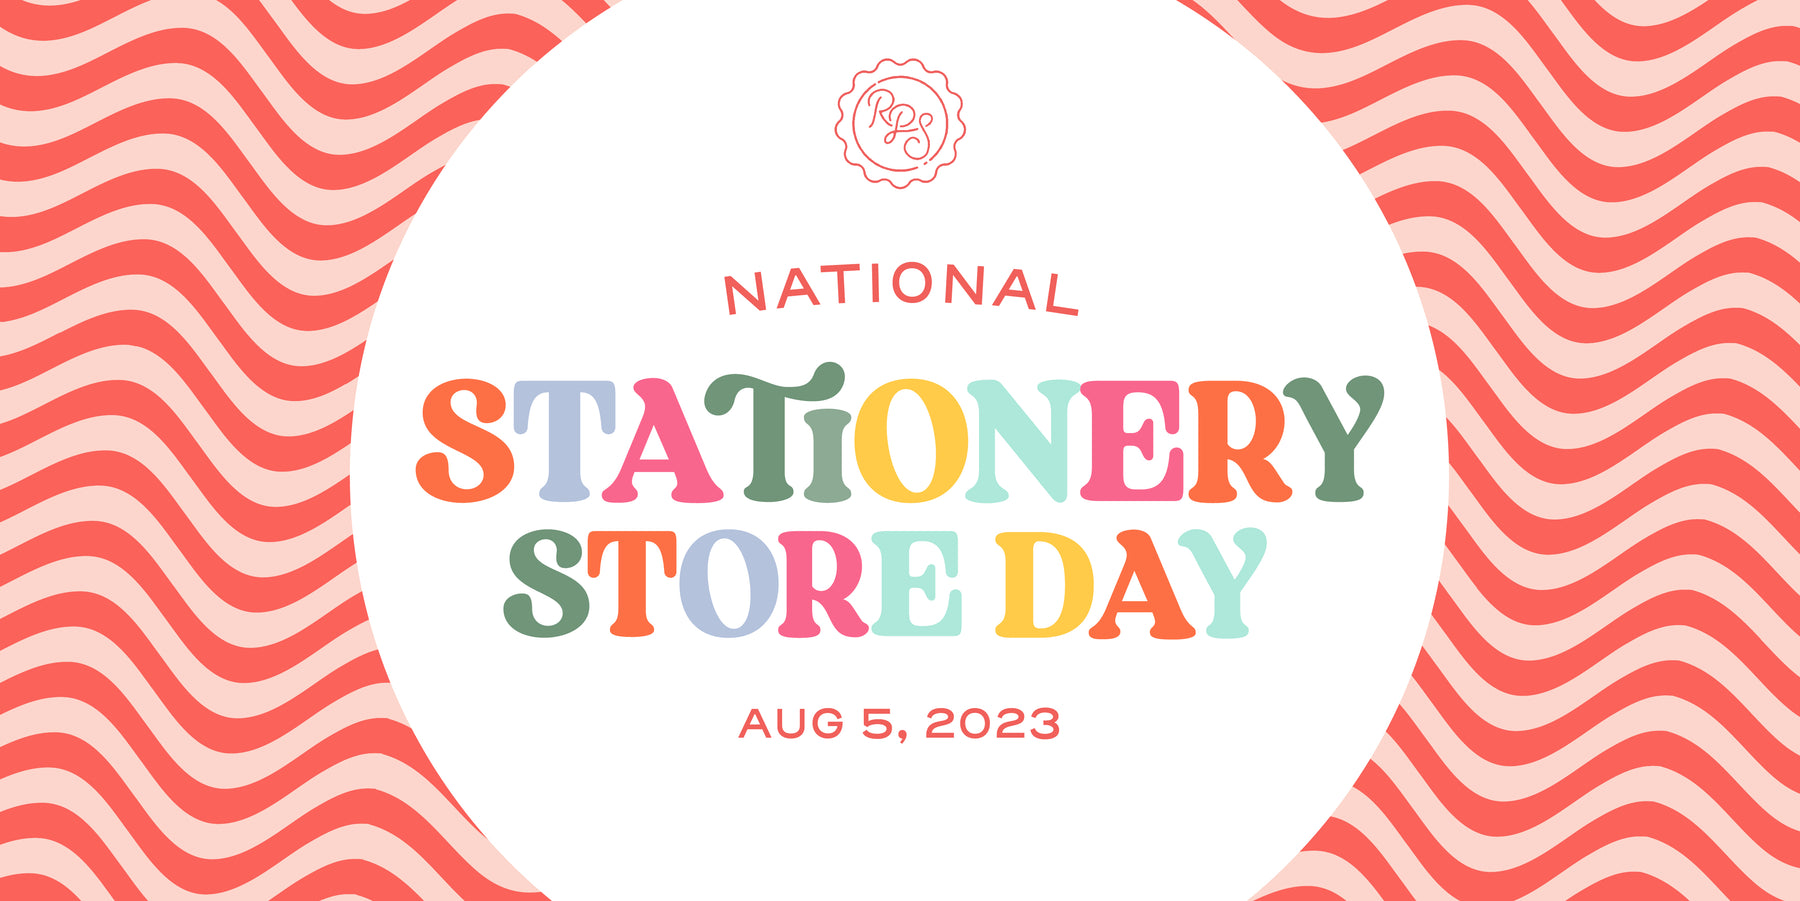 Stationery Store Day